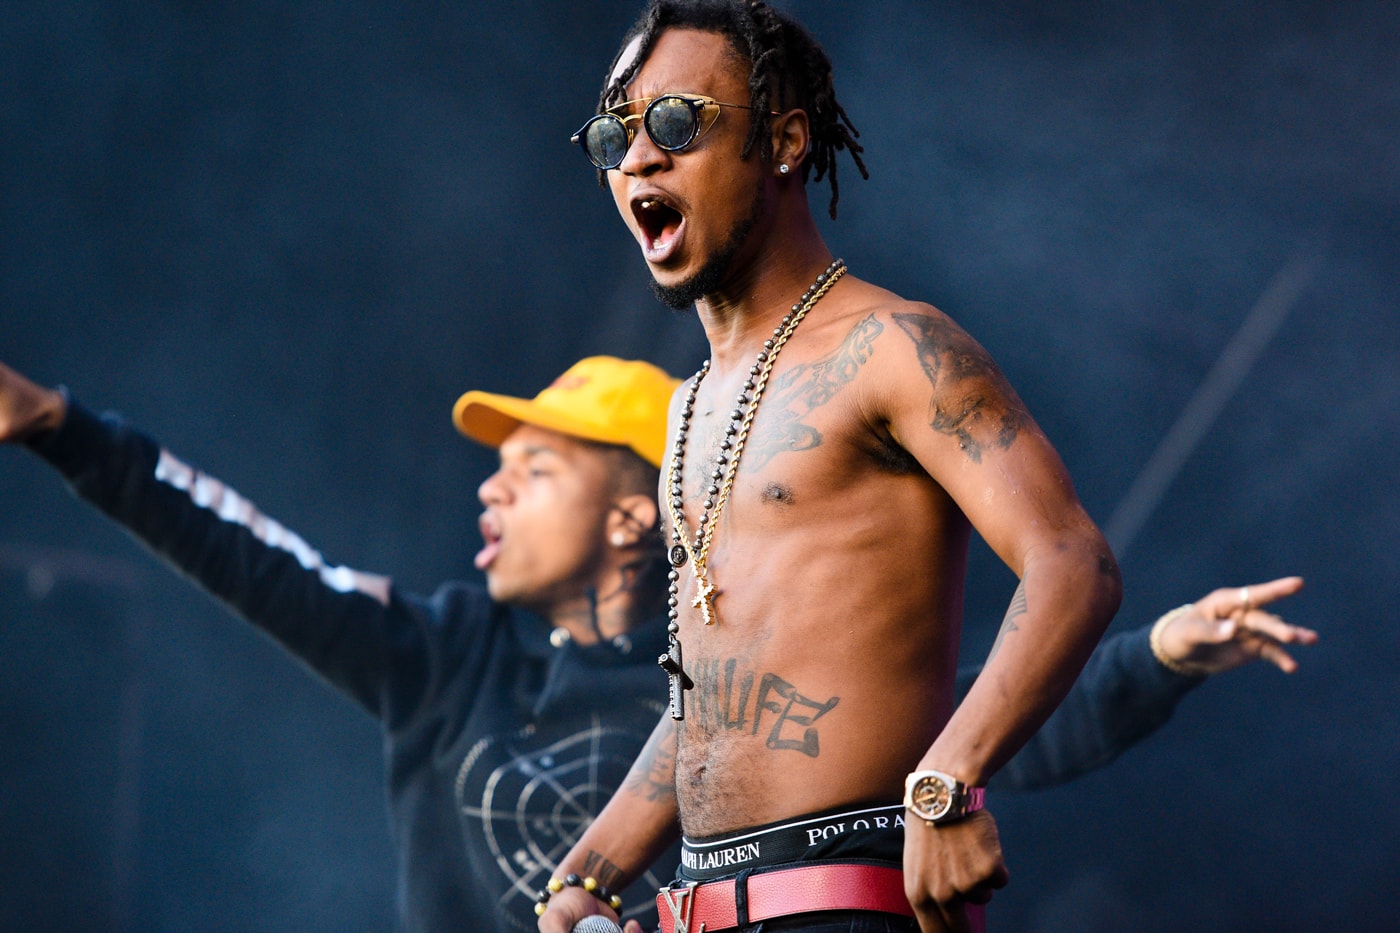 mike-will-made-it-rae-sremmurd-new-song